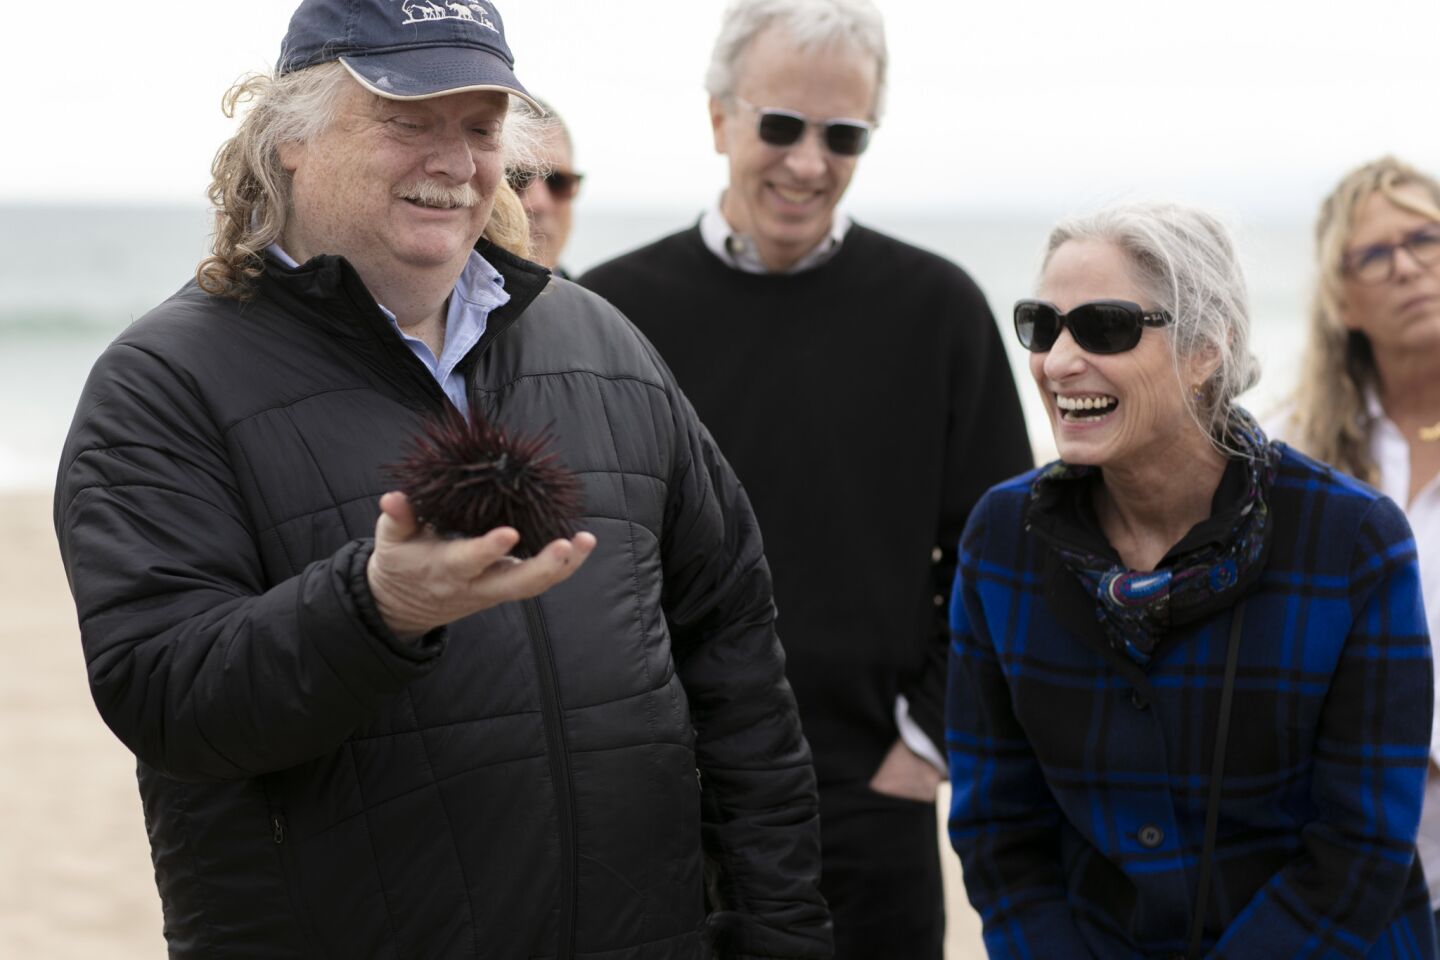 Los Angeles Times food critic Jonathan Gold handles a sea urchin during a Food Bowl event in Manhattan Beach in May.